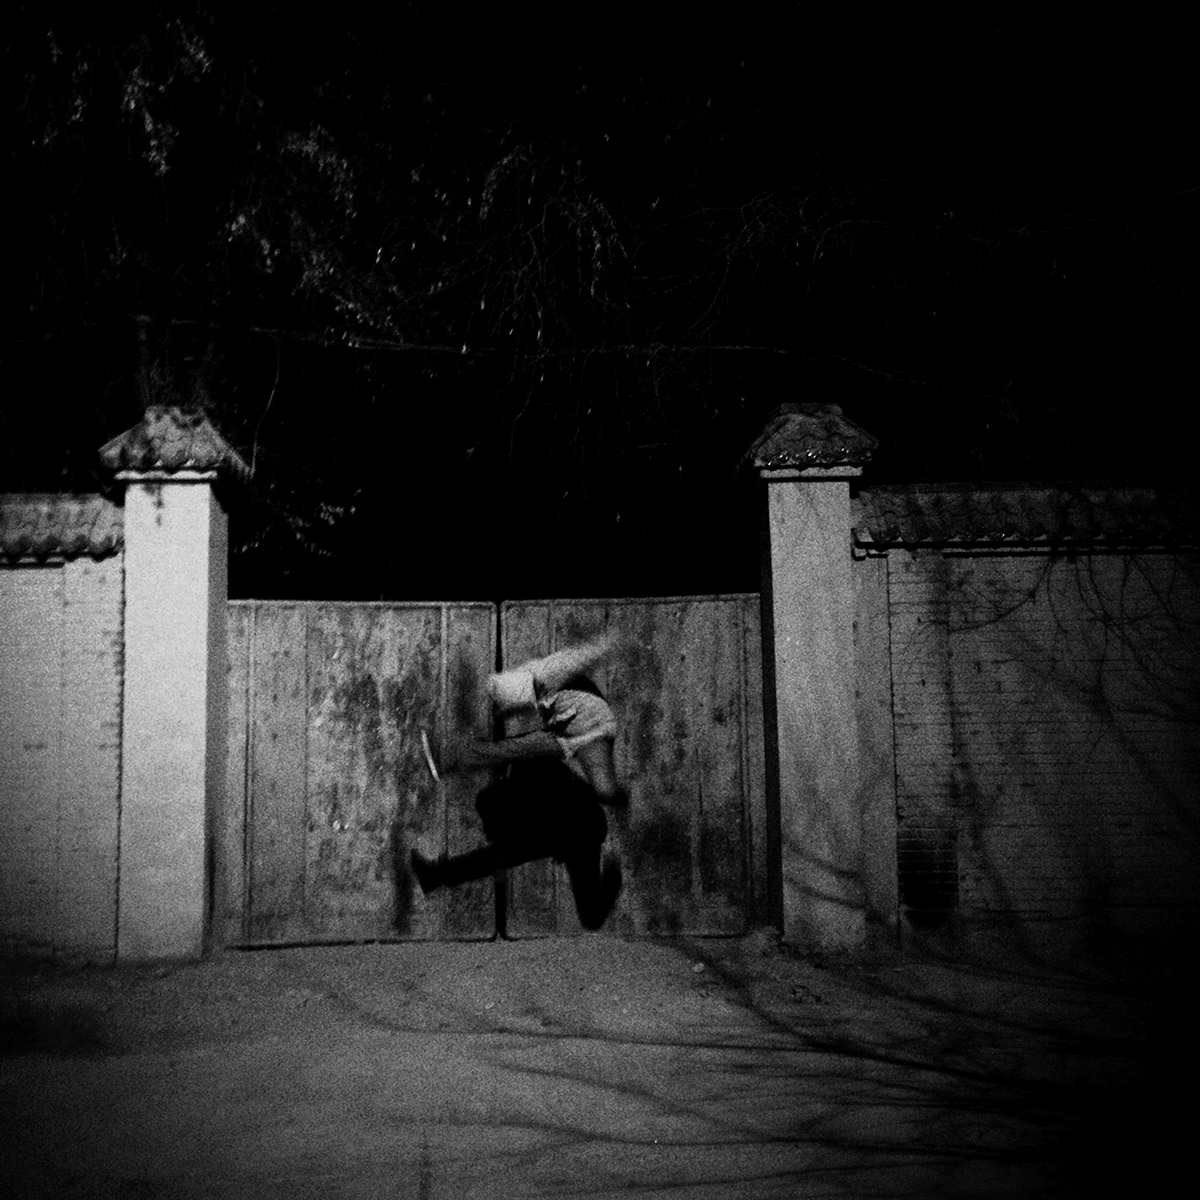 b&w jump china night friend winter iPhoneography childhood home boy game air jiuquan Gansu the game places